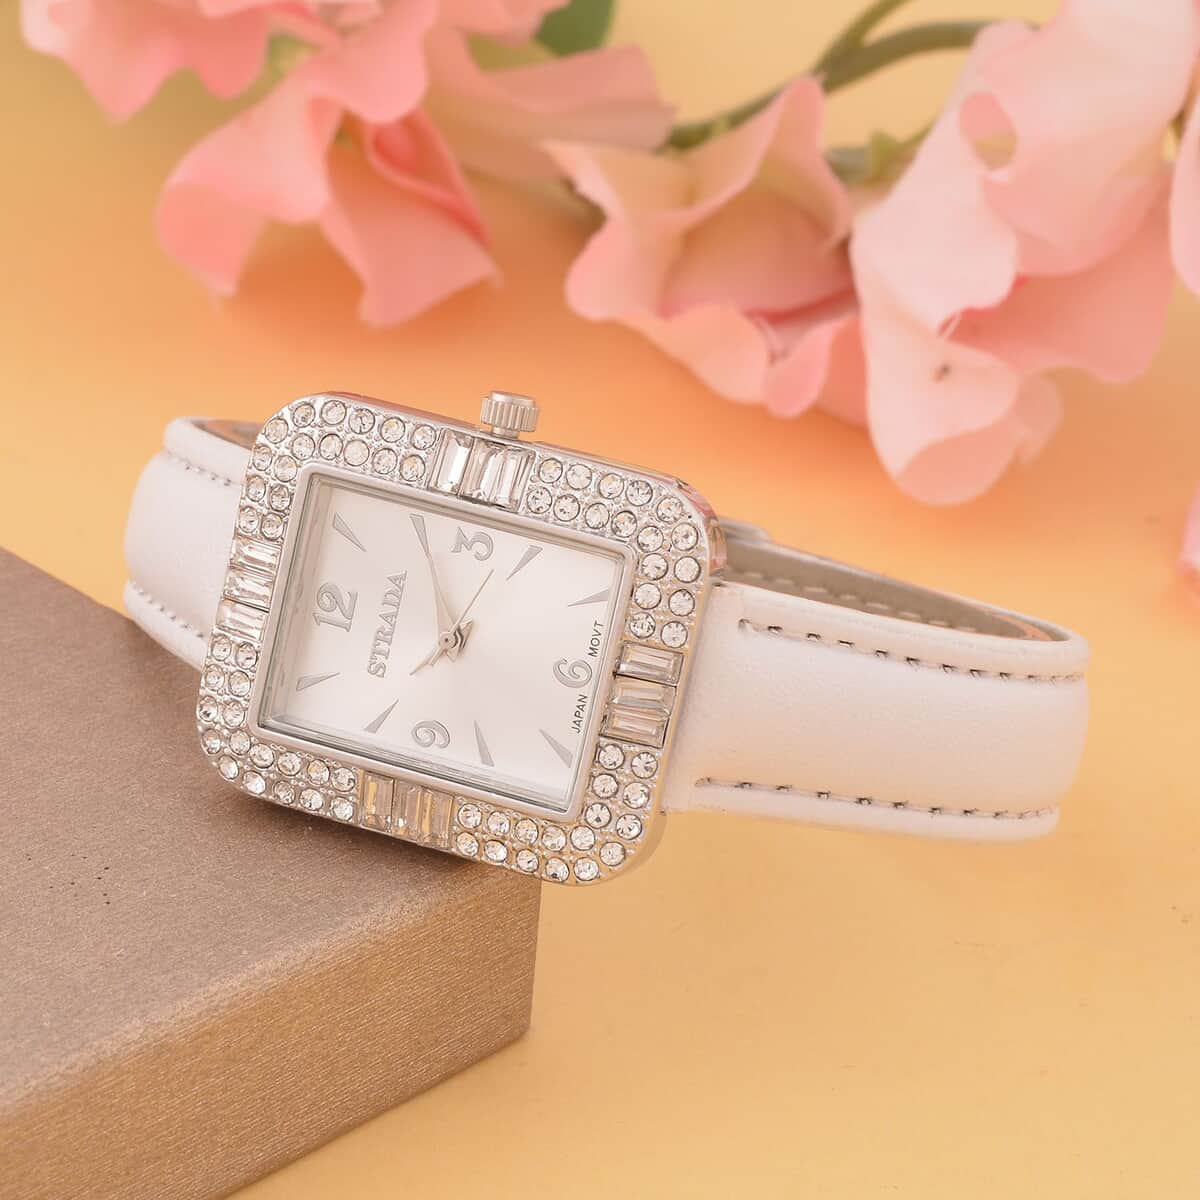 Strada White Austrian Crystal Japanese Movement Watch with White Faux Leather Strap (34mm) (6.5-8In) image number 1